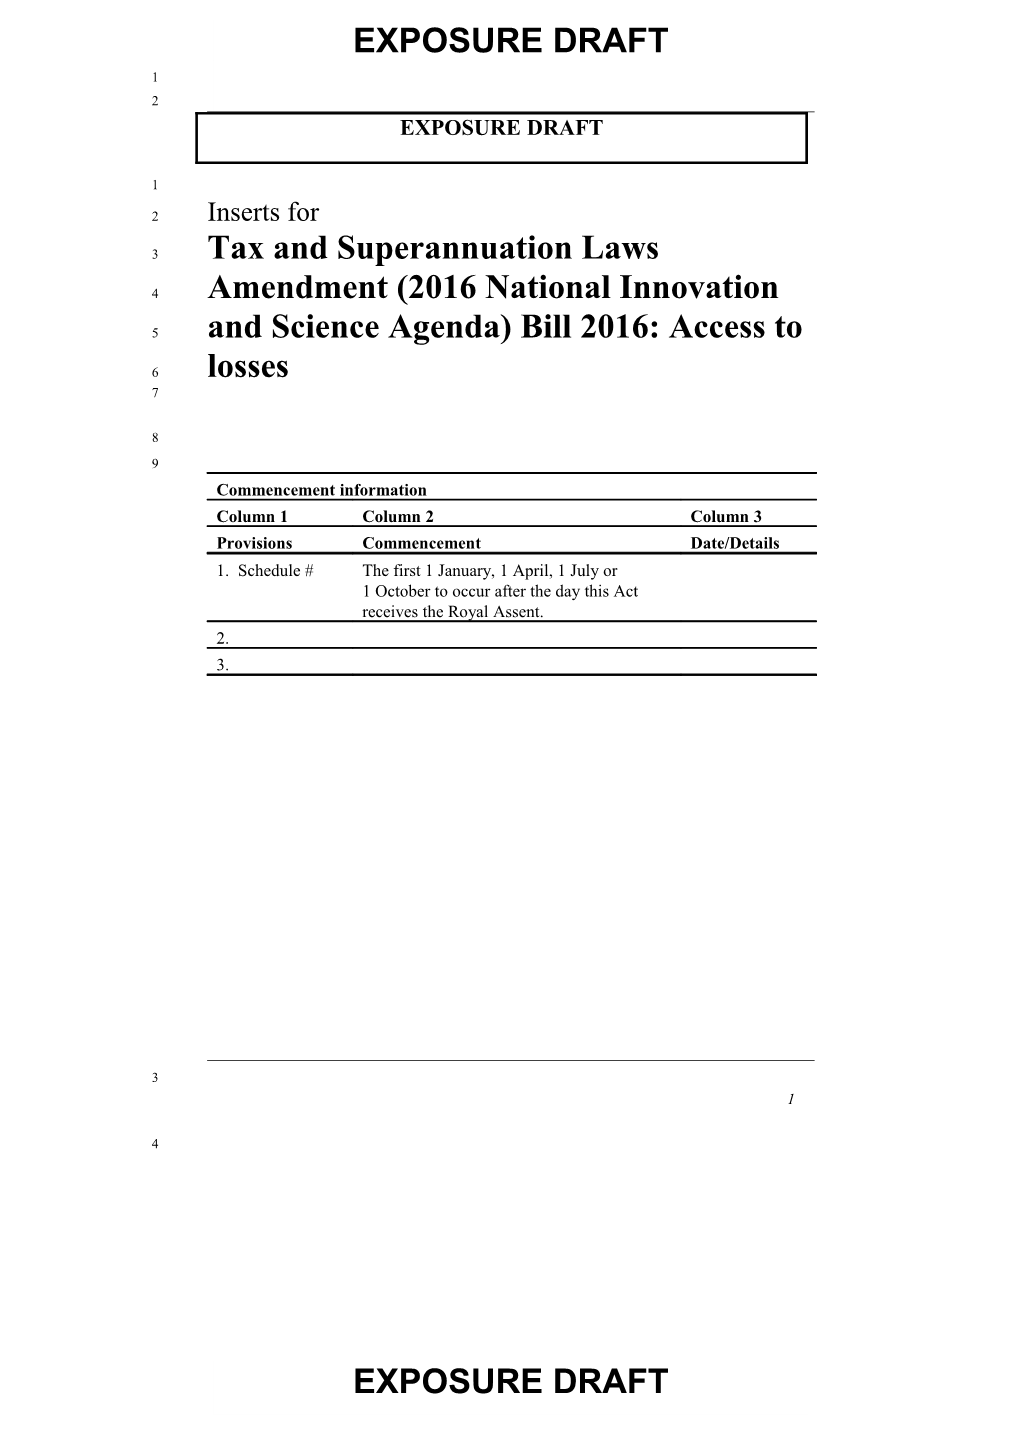 Exposure Draft - Tax and Superannuation Laws Amendment (Measures for a Later Sitting) Bill